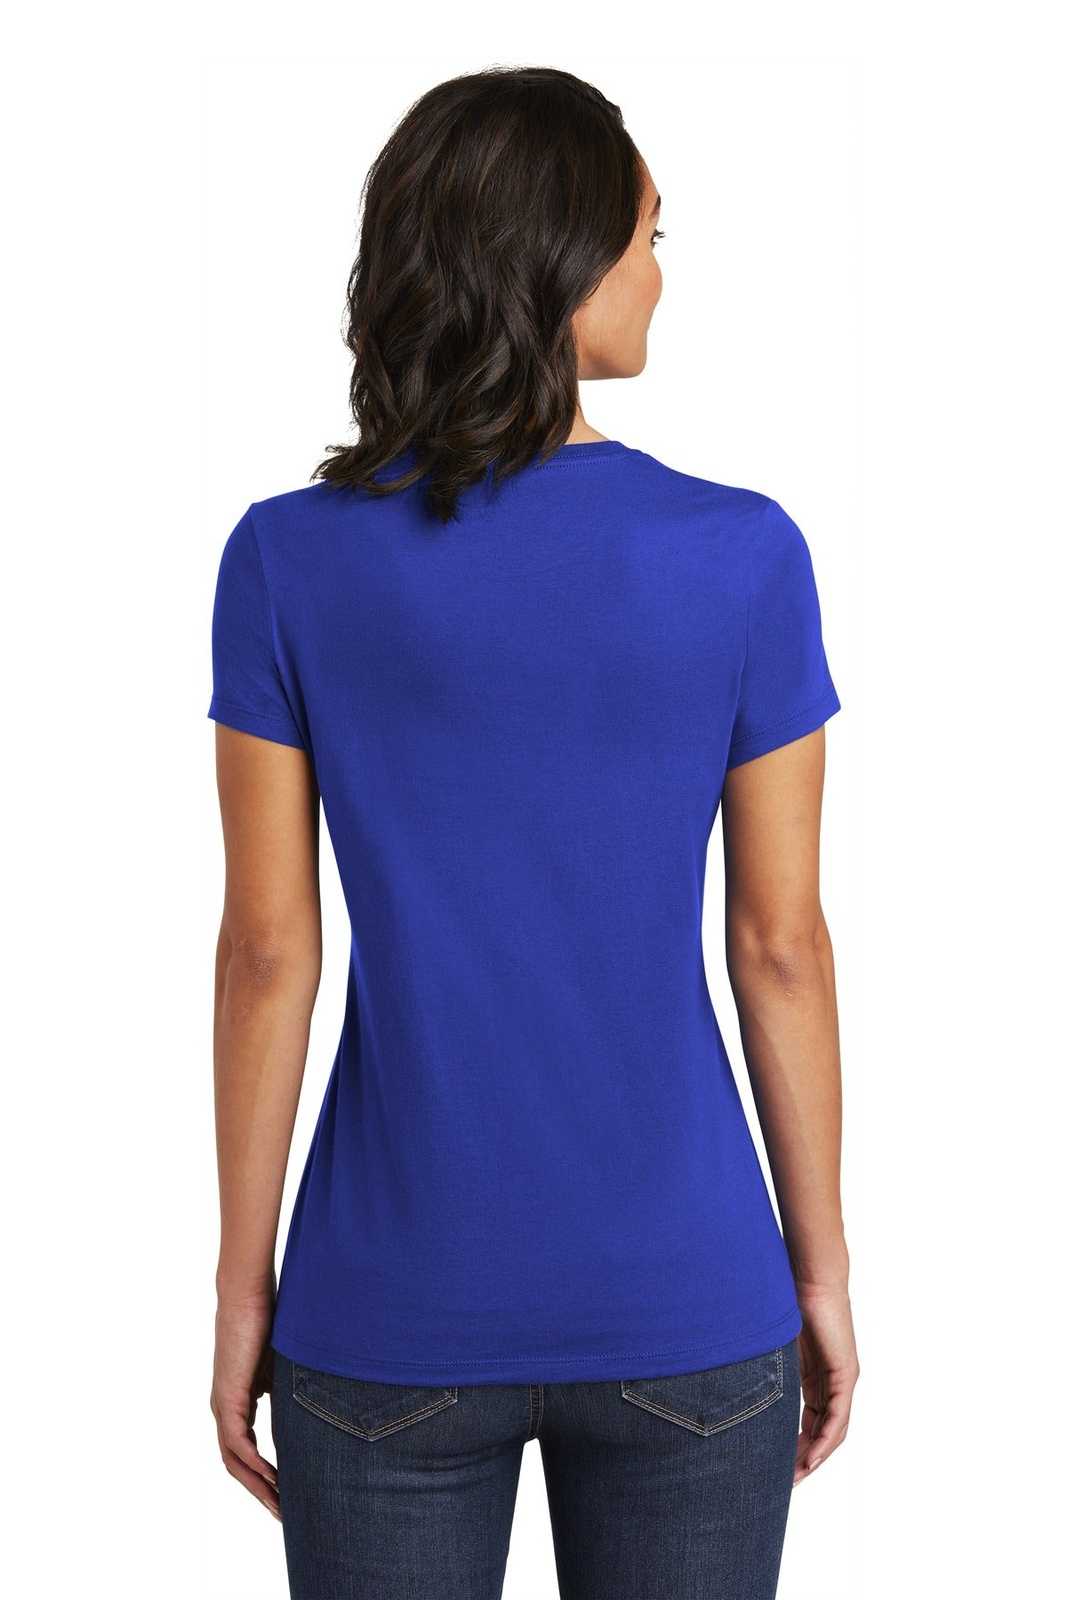 District DT6002 Women's Very Important Tee - Deep Royal - HIT a Double - 1